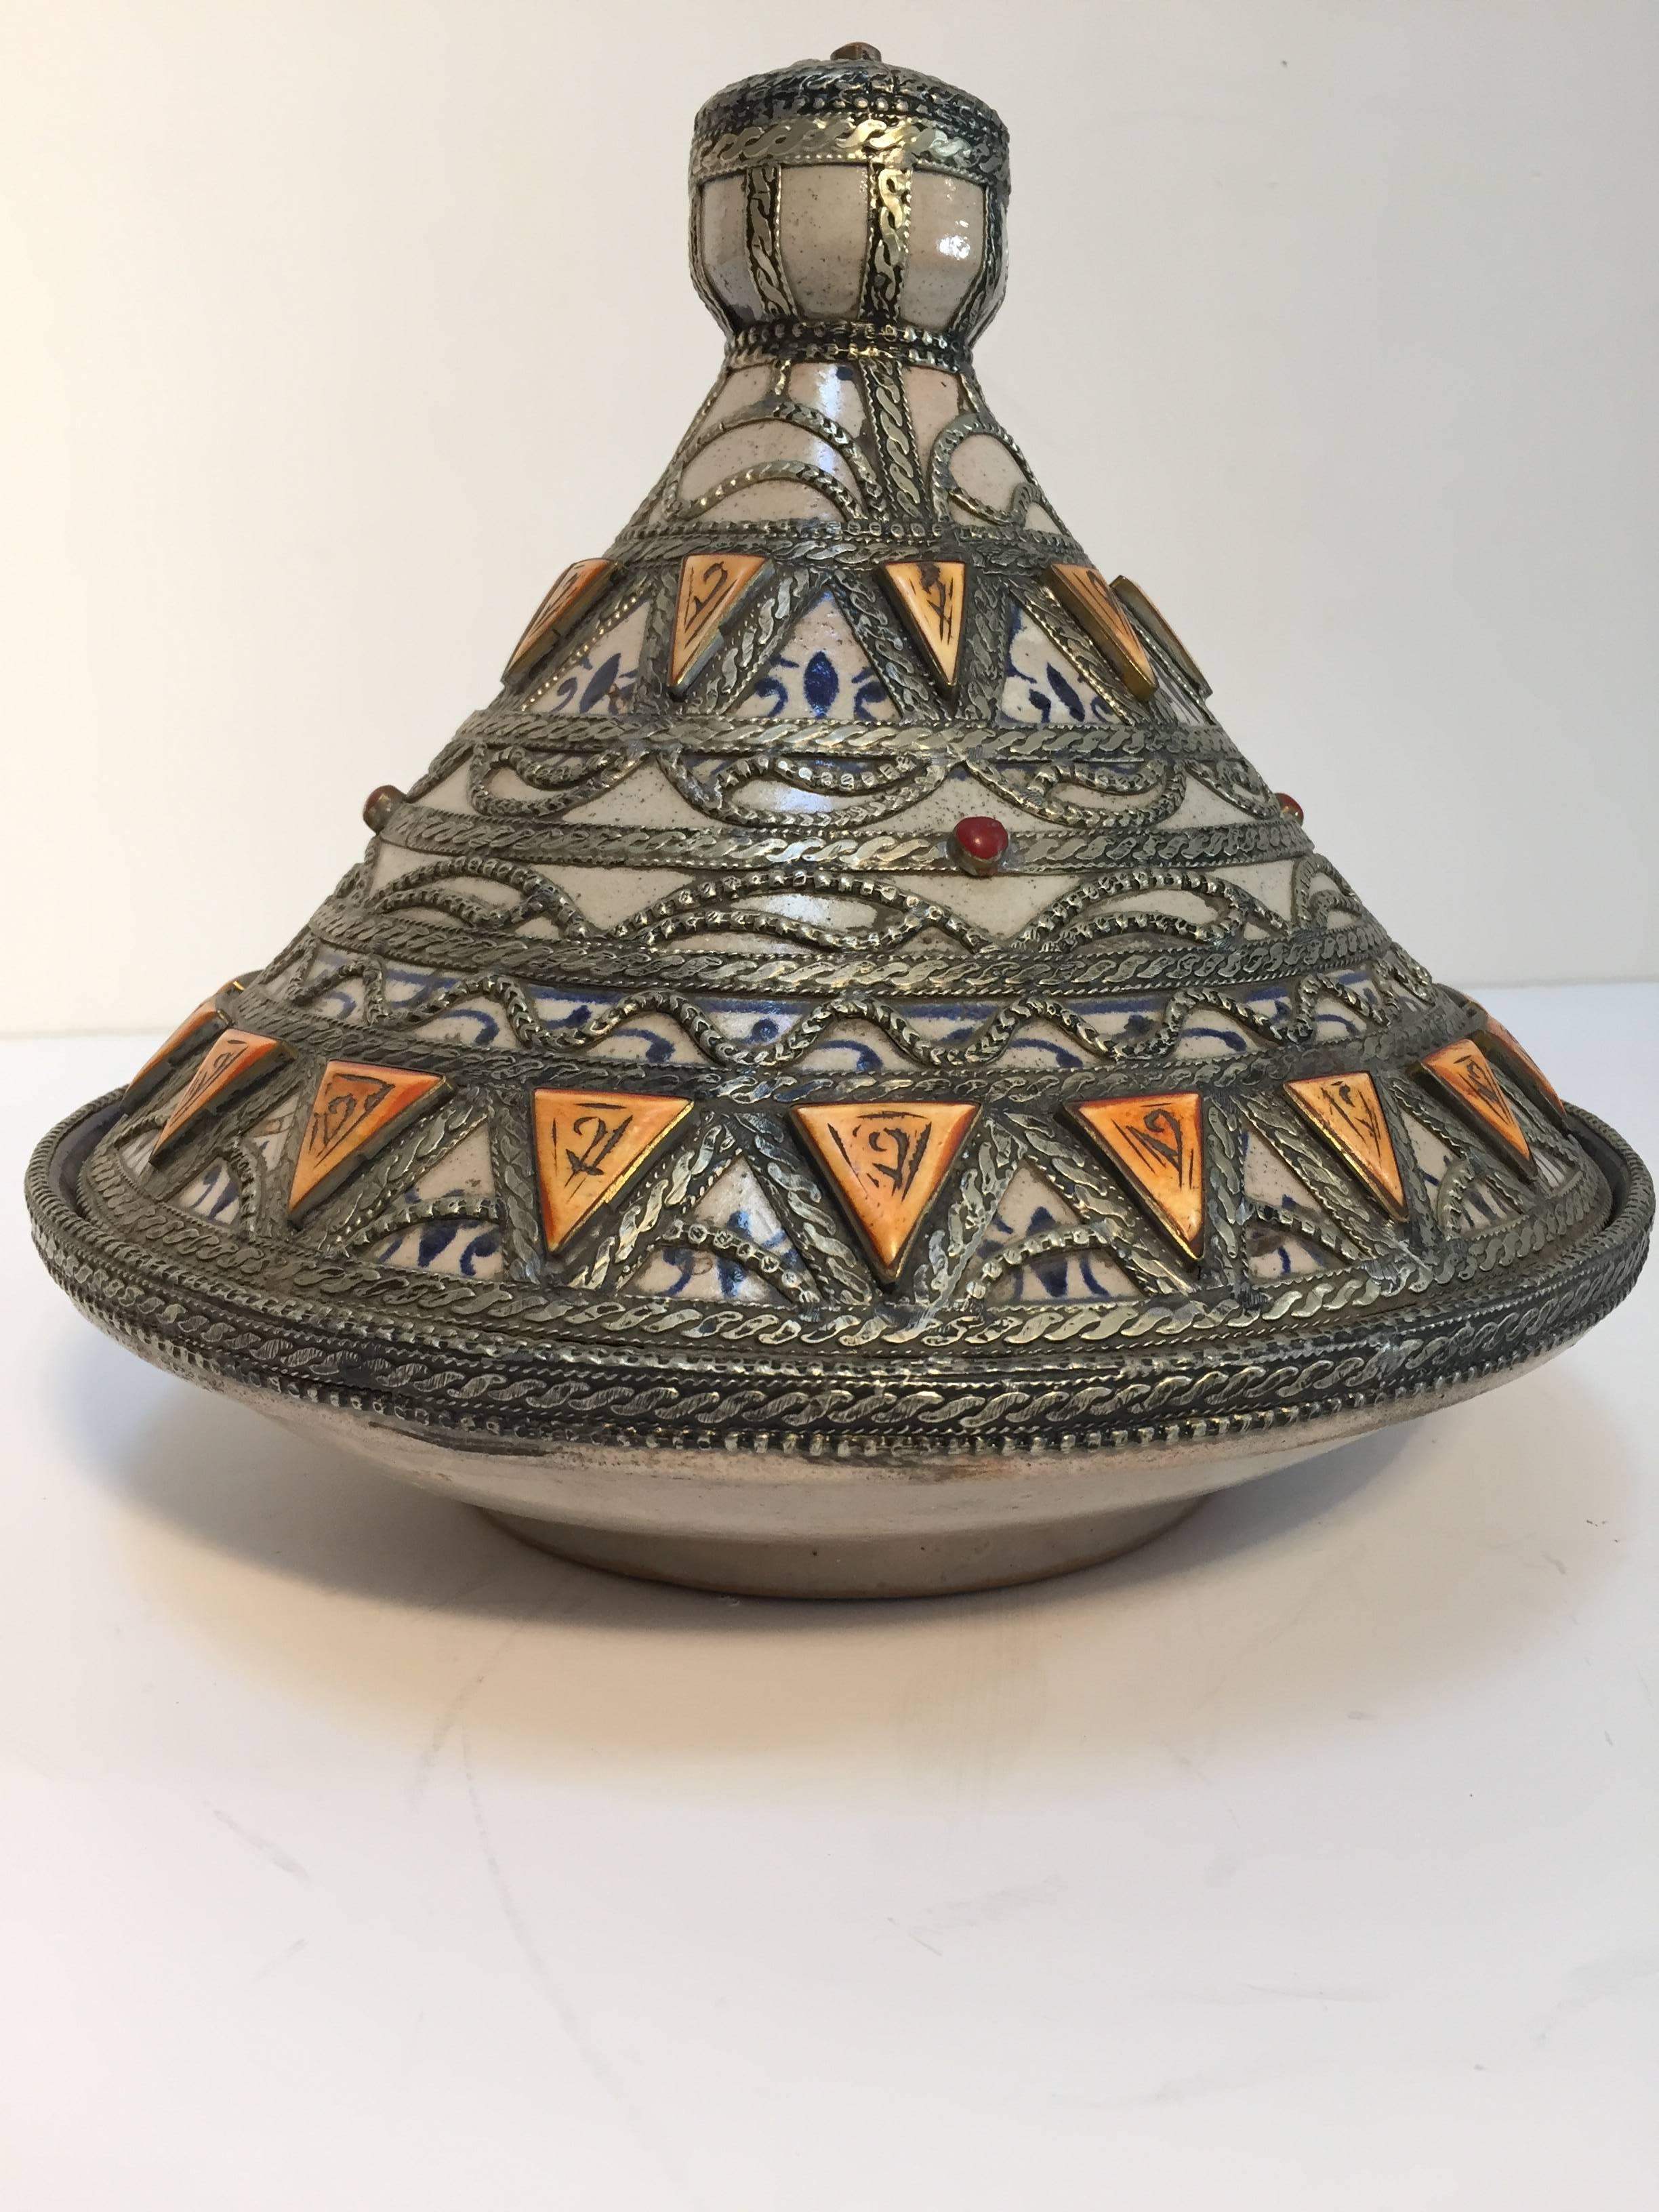 Moroccan ceramic decorative tajine polychrome with leather, stones and metal overlay with conical lid.
The bottom is a circular ceramic bowl hand painted in blue and white Moorish designs and the top of the tagine is distinctively shaped into a cone